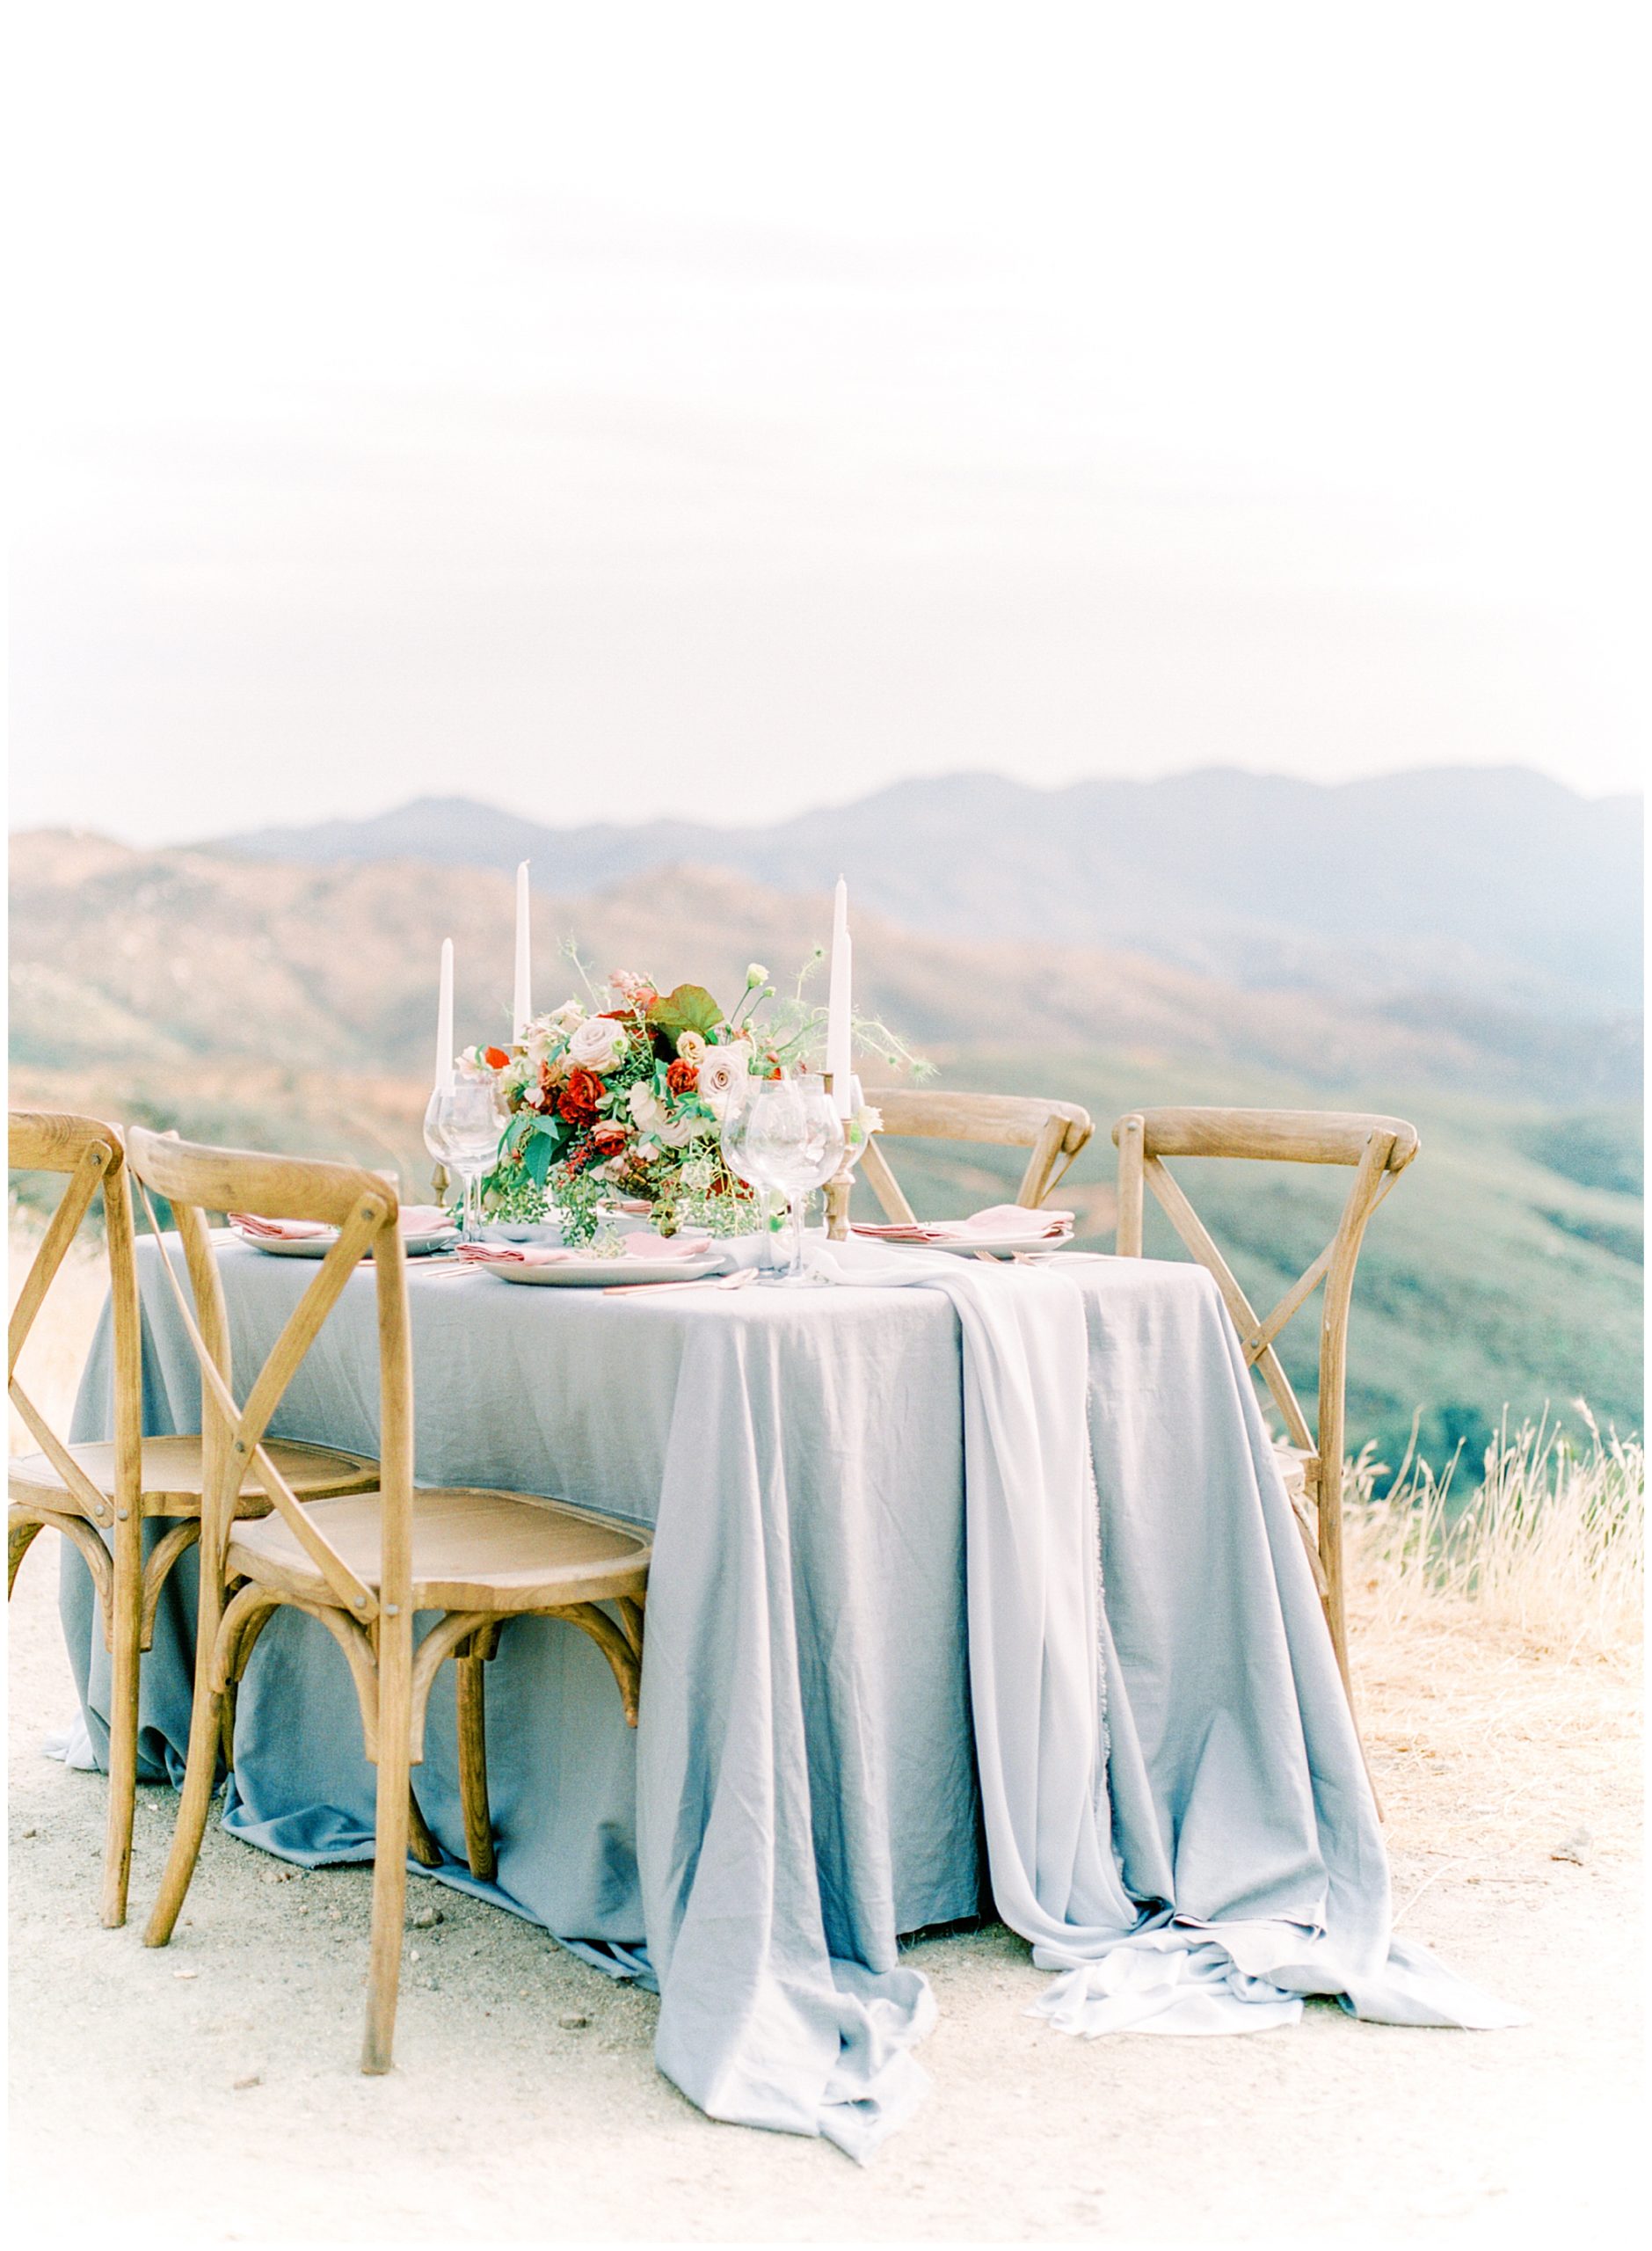 tablescape by the side of the road